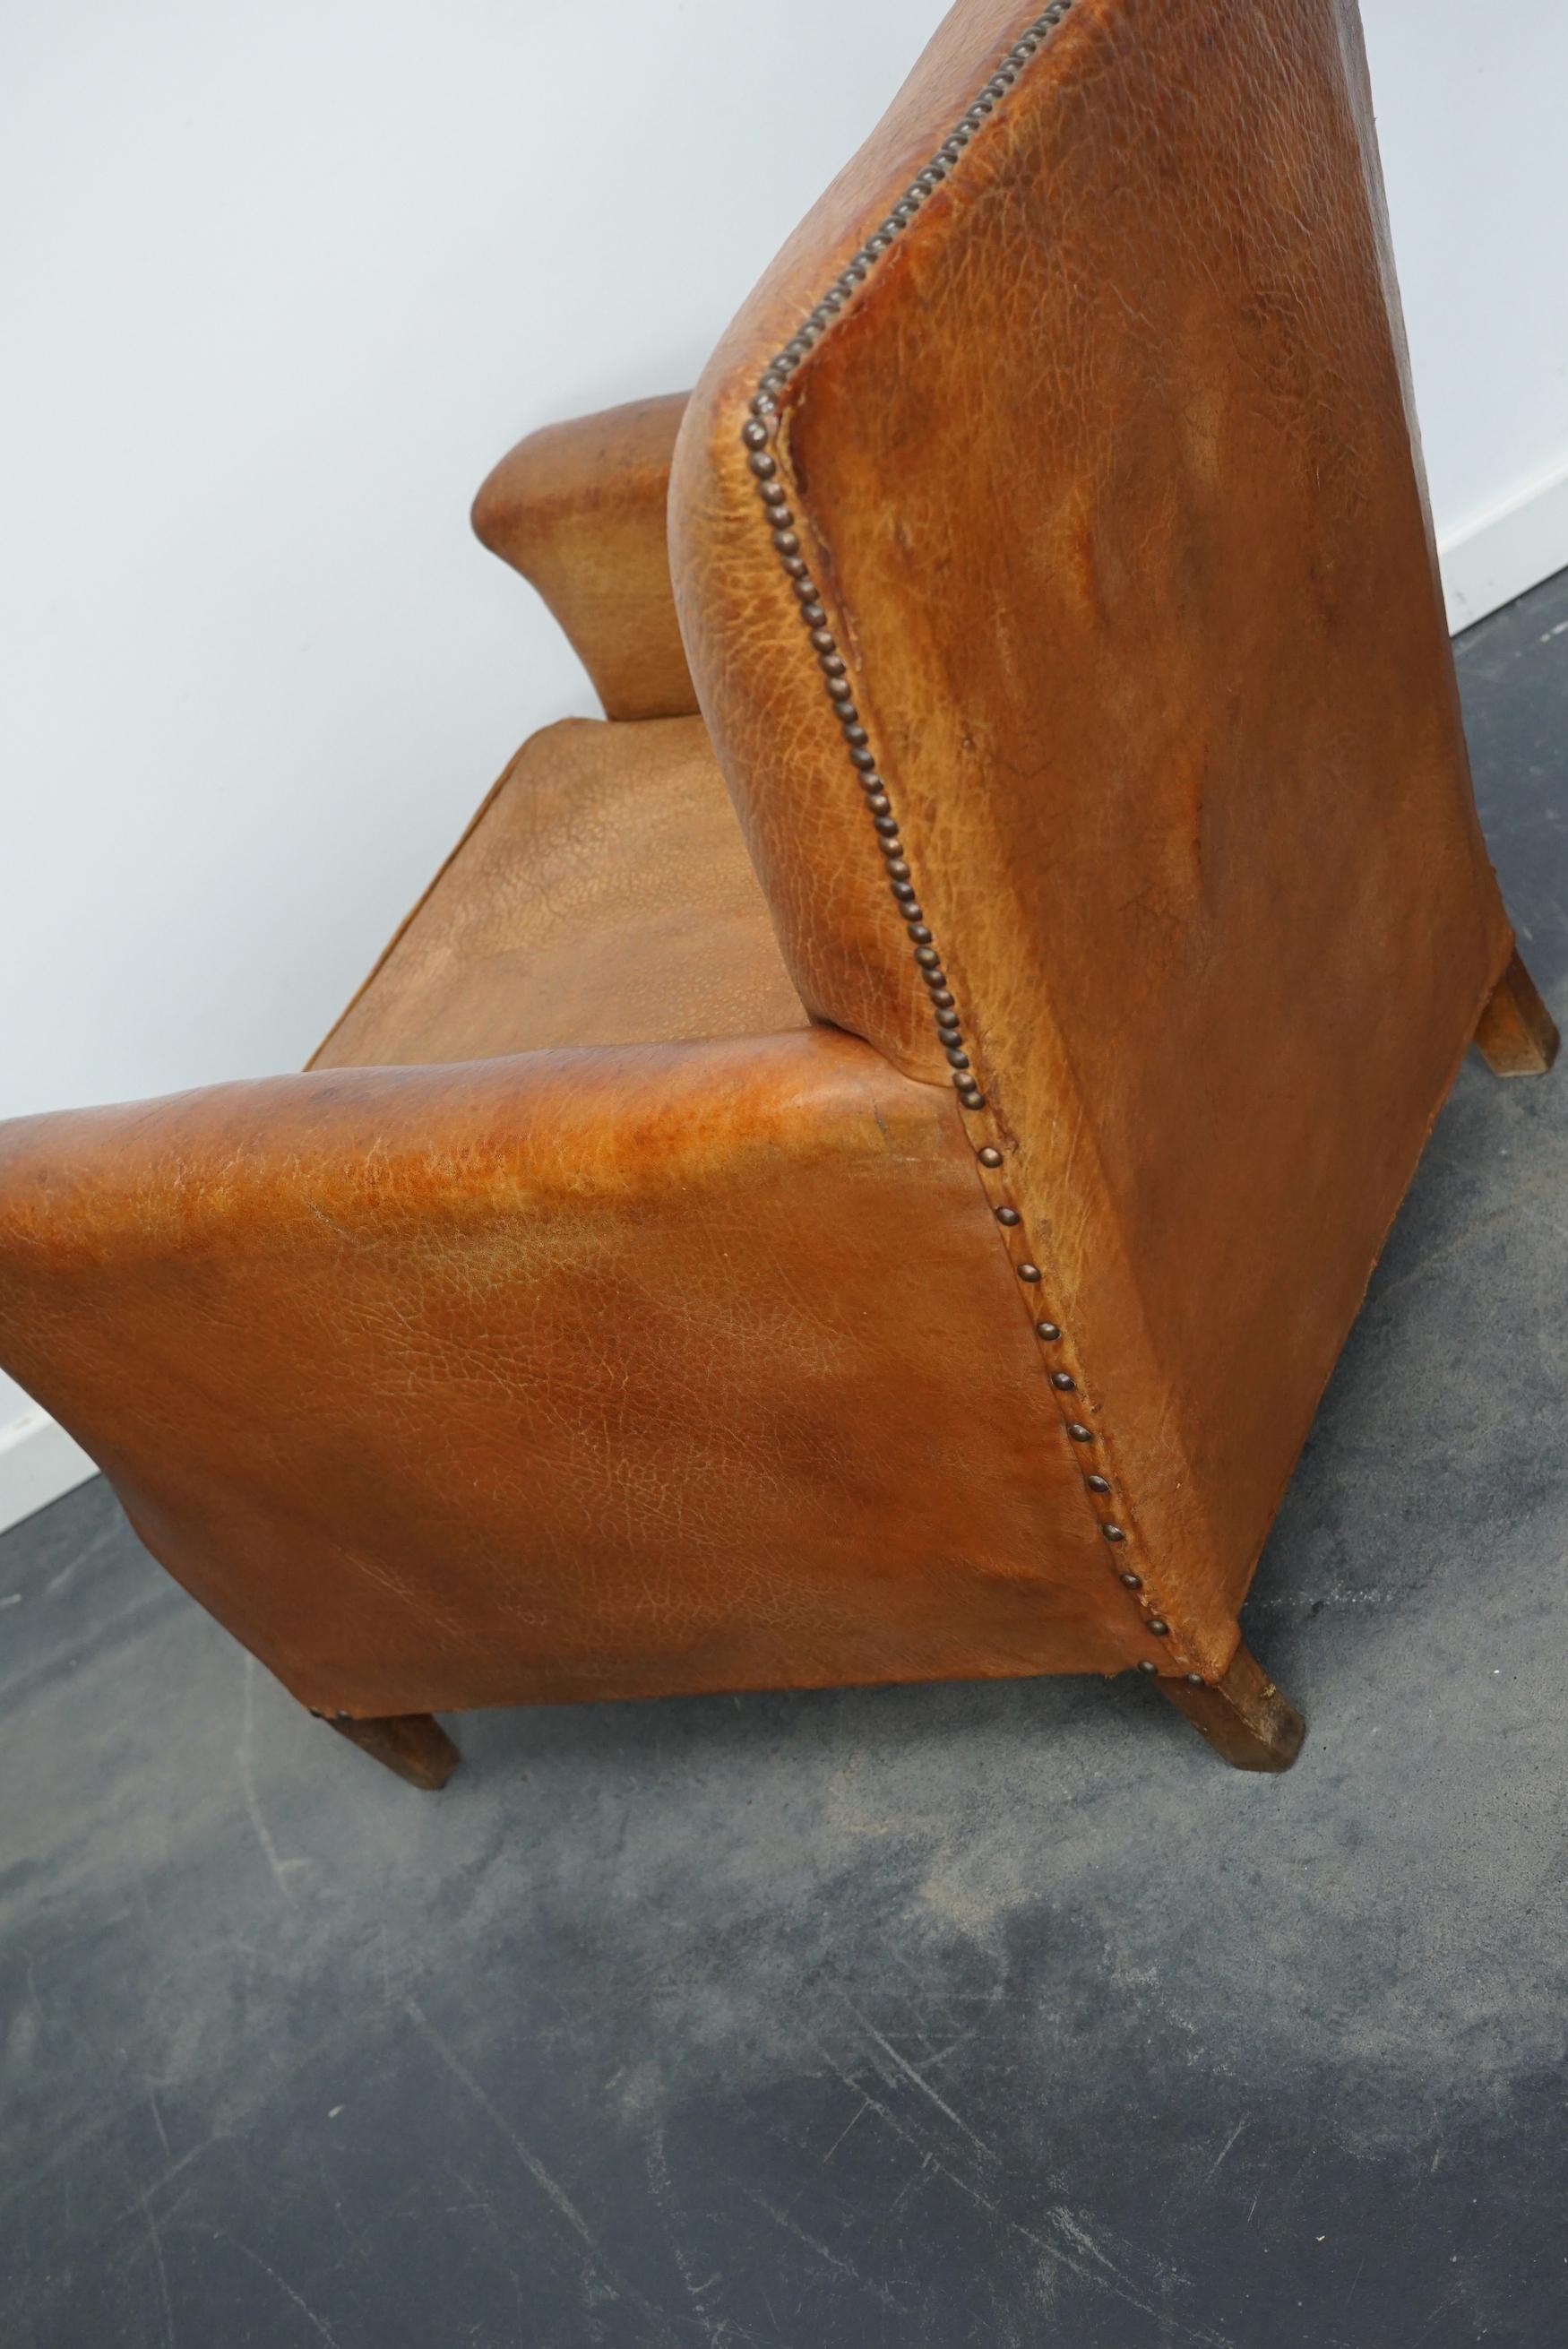 Vintage French Cognac-Colored Leather Club Chair, 1940s For Sale 8